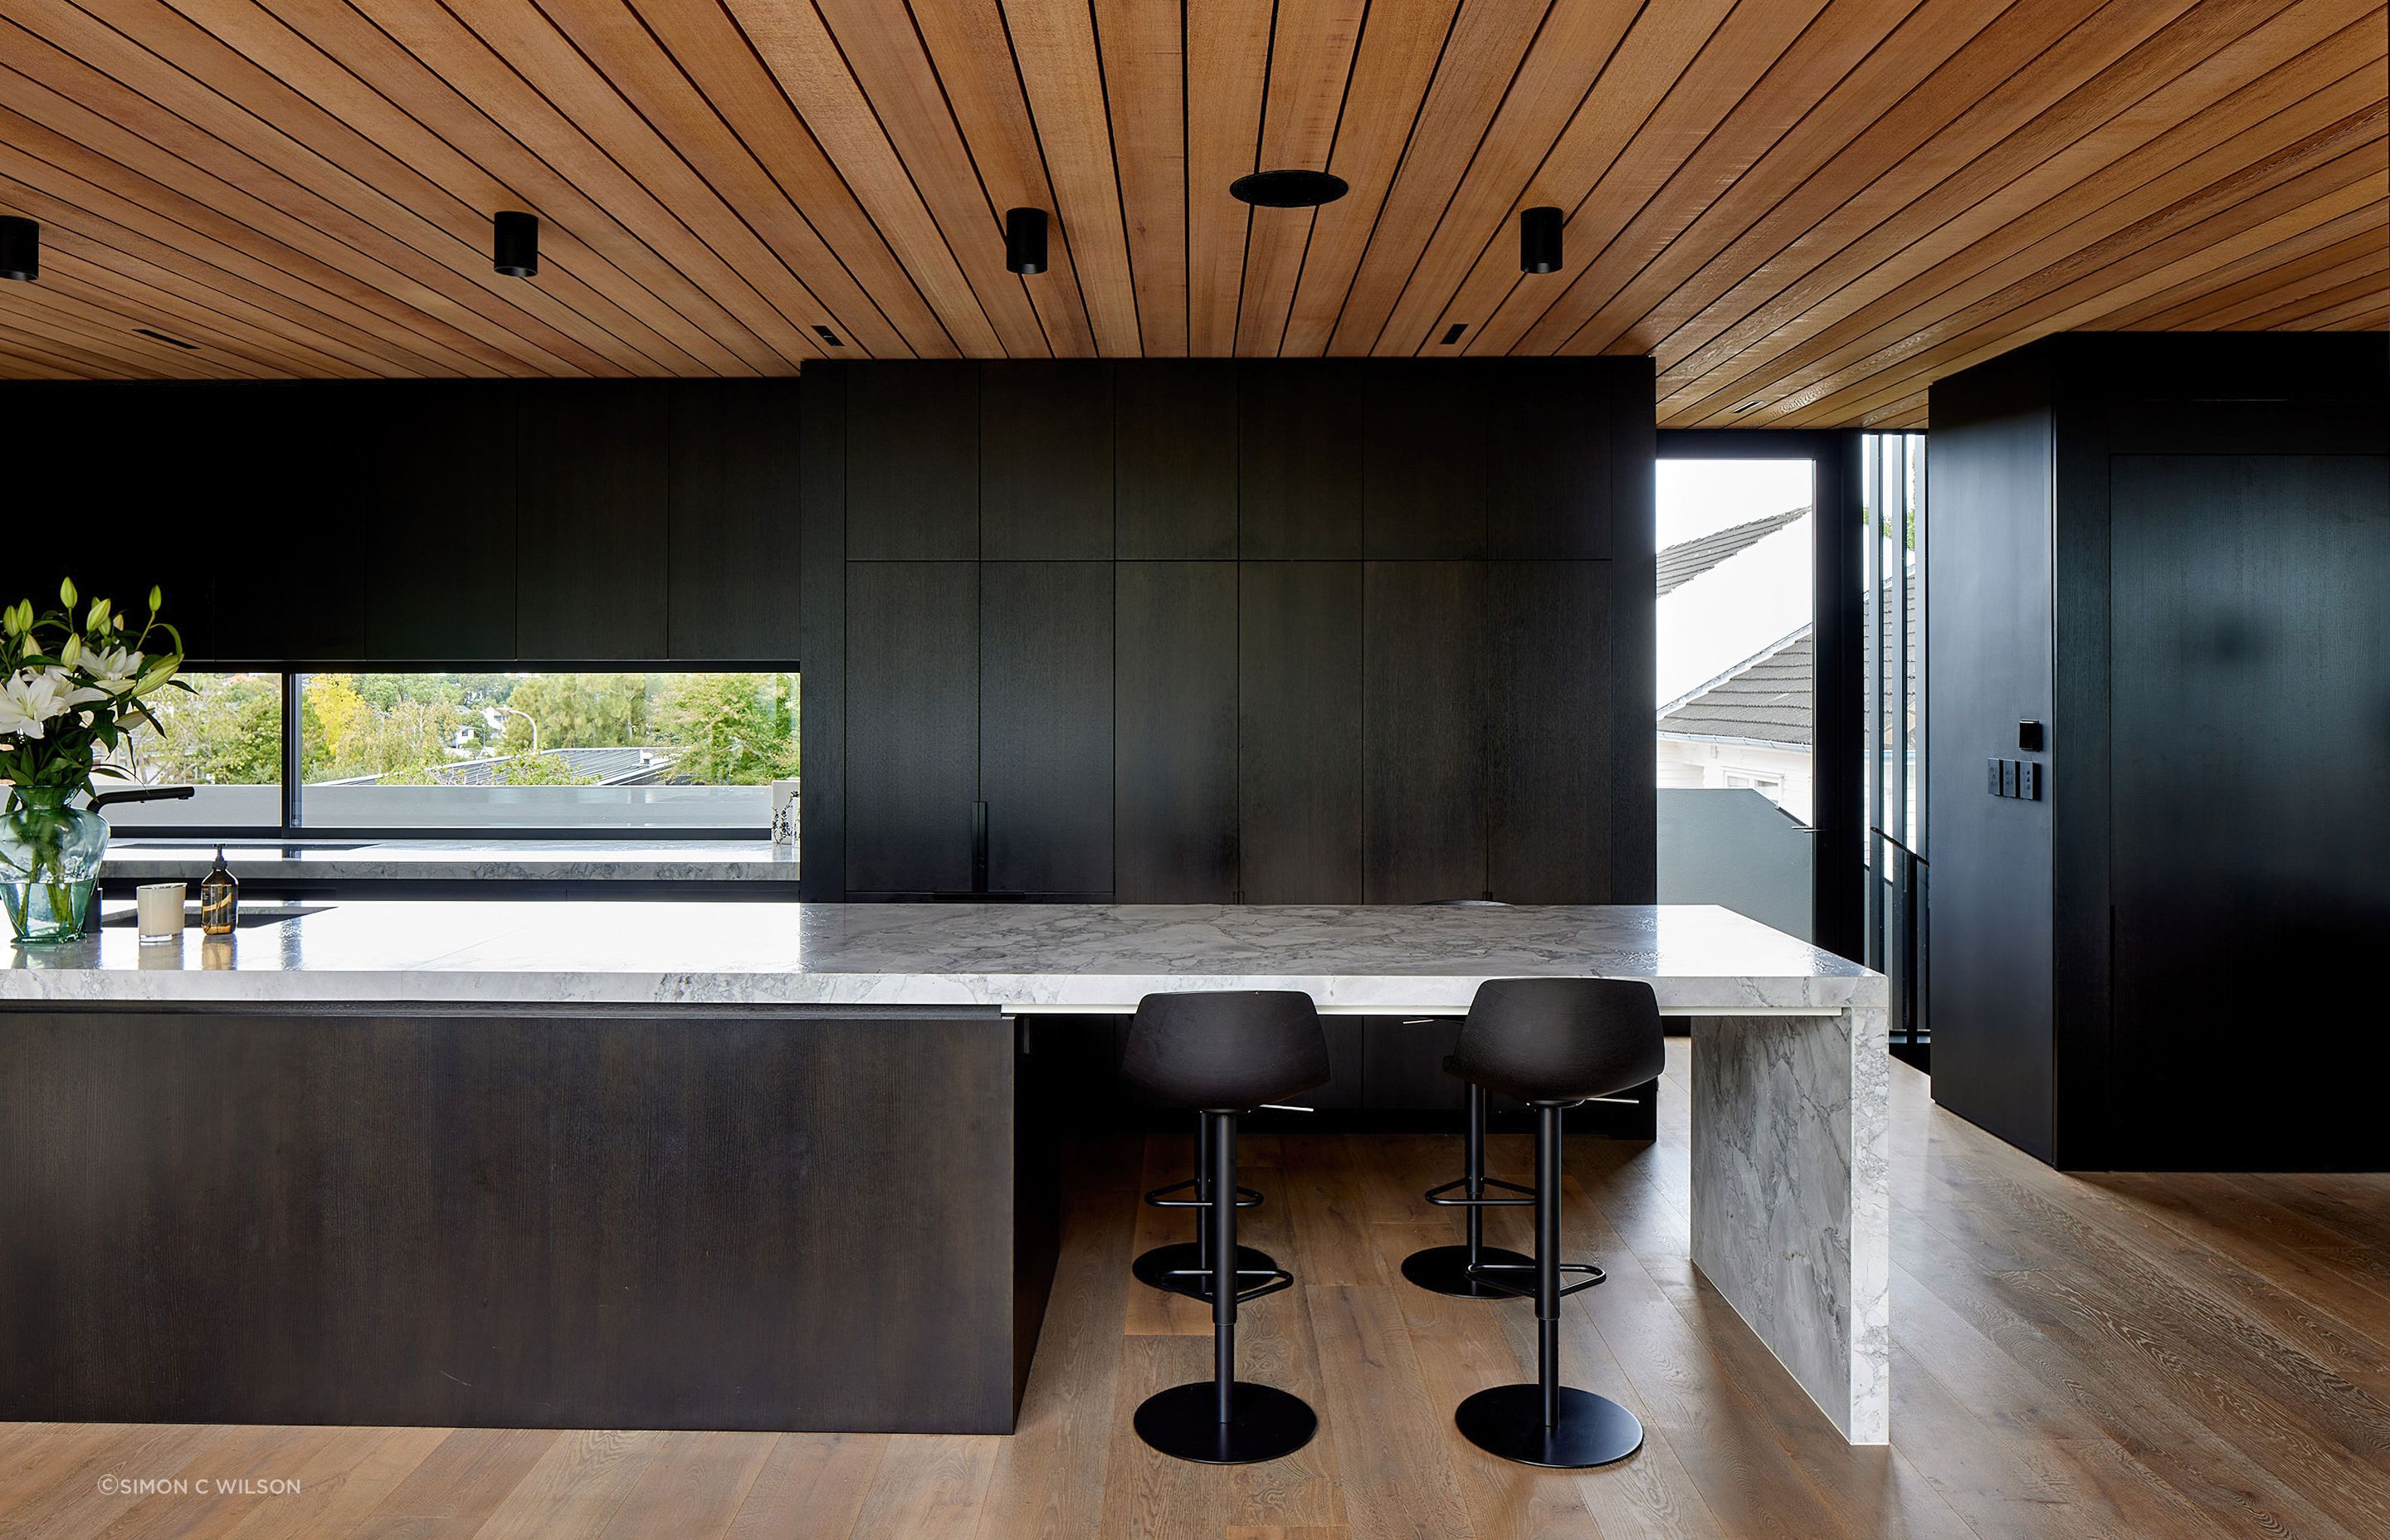 A granite island bench runs the length of the kitchen.